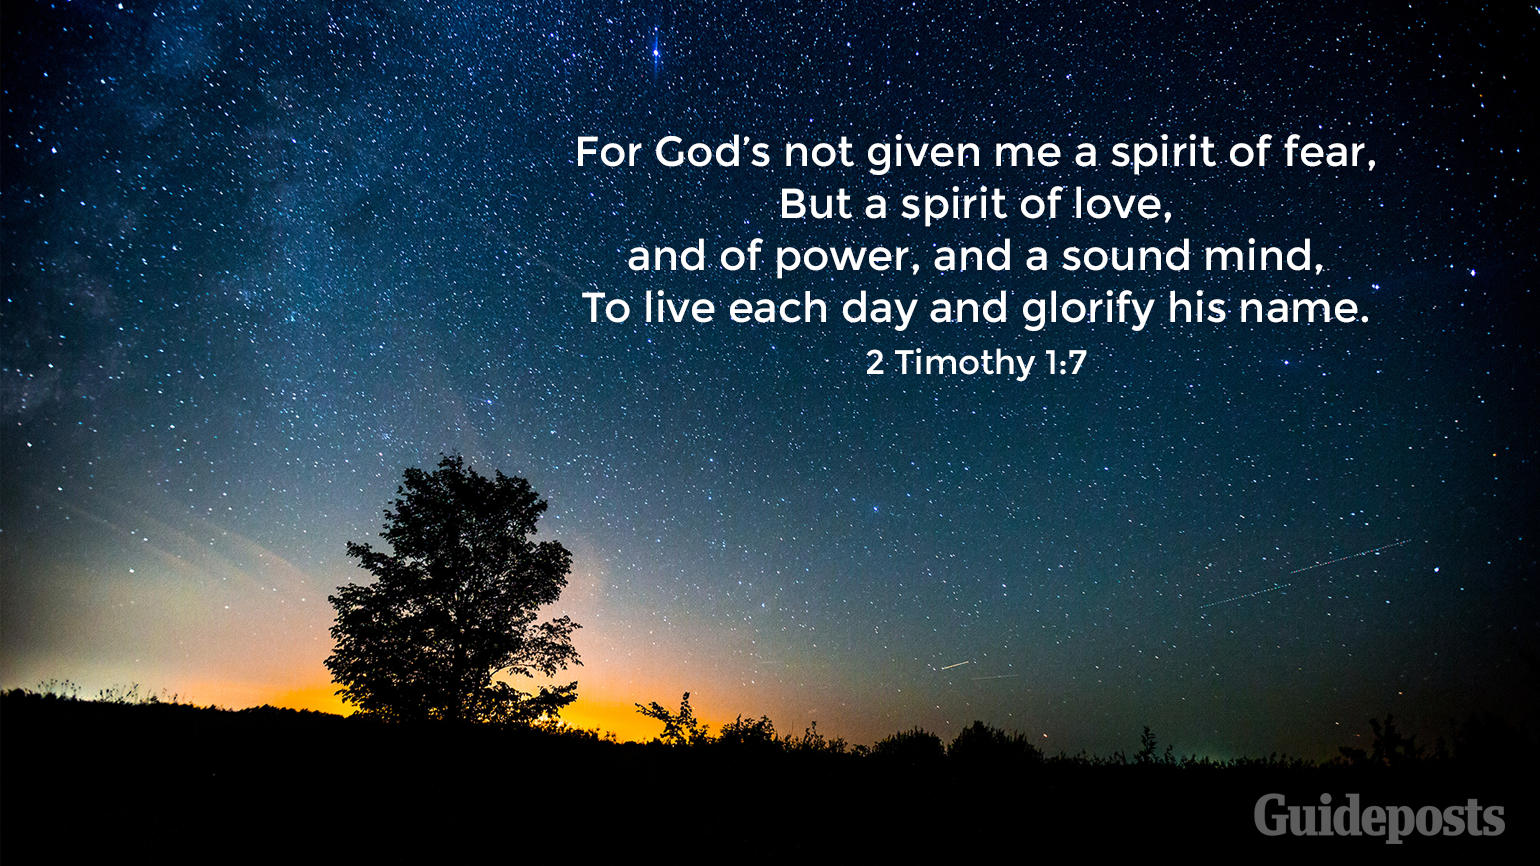 7 Bible Verses for a Good Night's Sleep "For God’s not given me a spirit of fear,  But a spirit of love,  and of power, and a sound mind, To live each day and glorify his name."  2 Timothy 1:7 Faith and Prayer Bible Resources